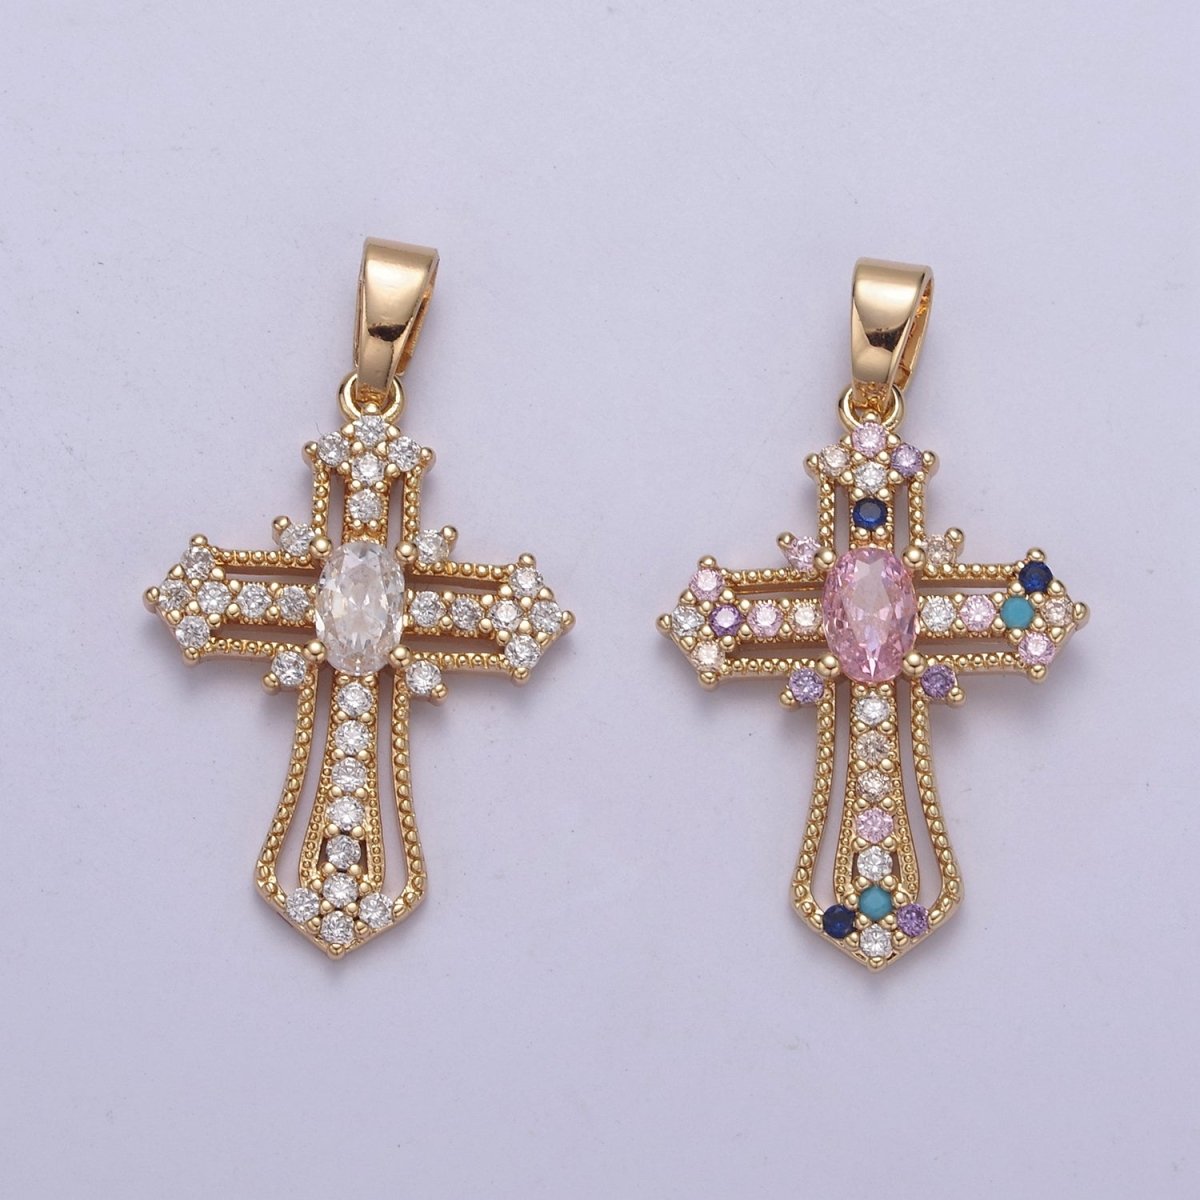 Beautiful Gold Filled CZ Cross Necklace Pendant Charm for Religious Christian Catholic Jewelry Making H-411 H-412 - DLUXCA